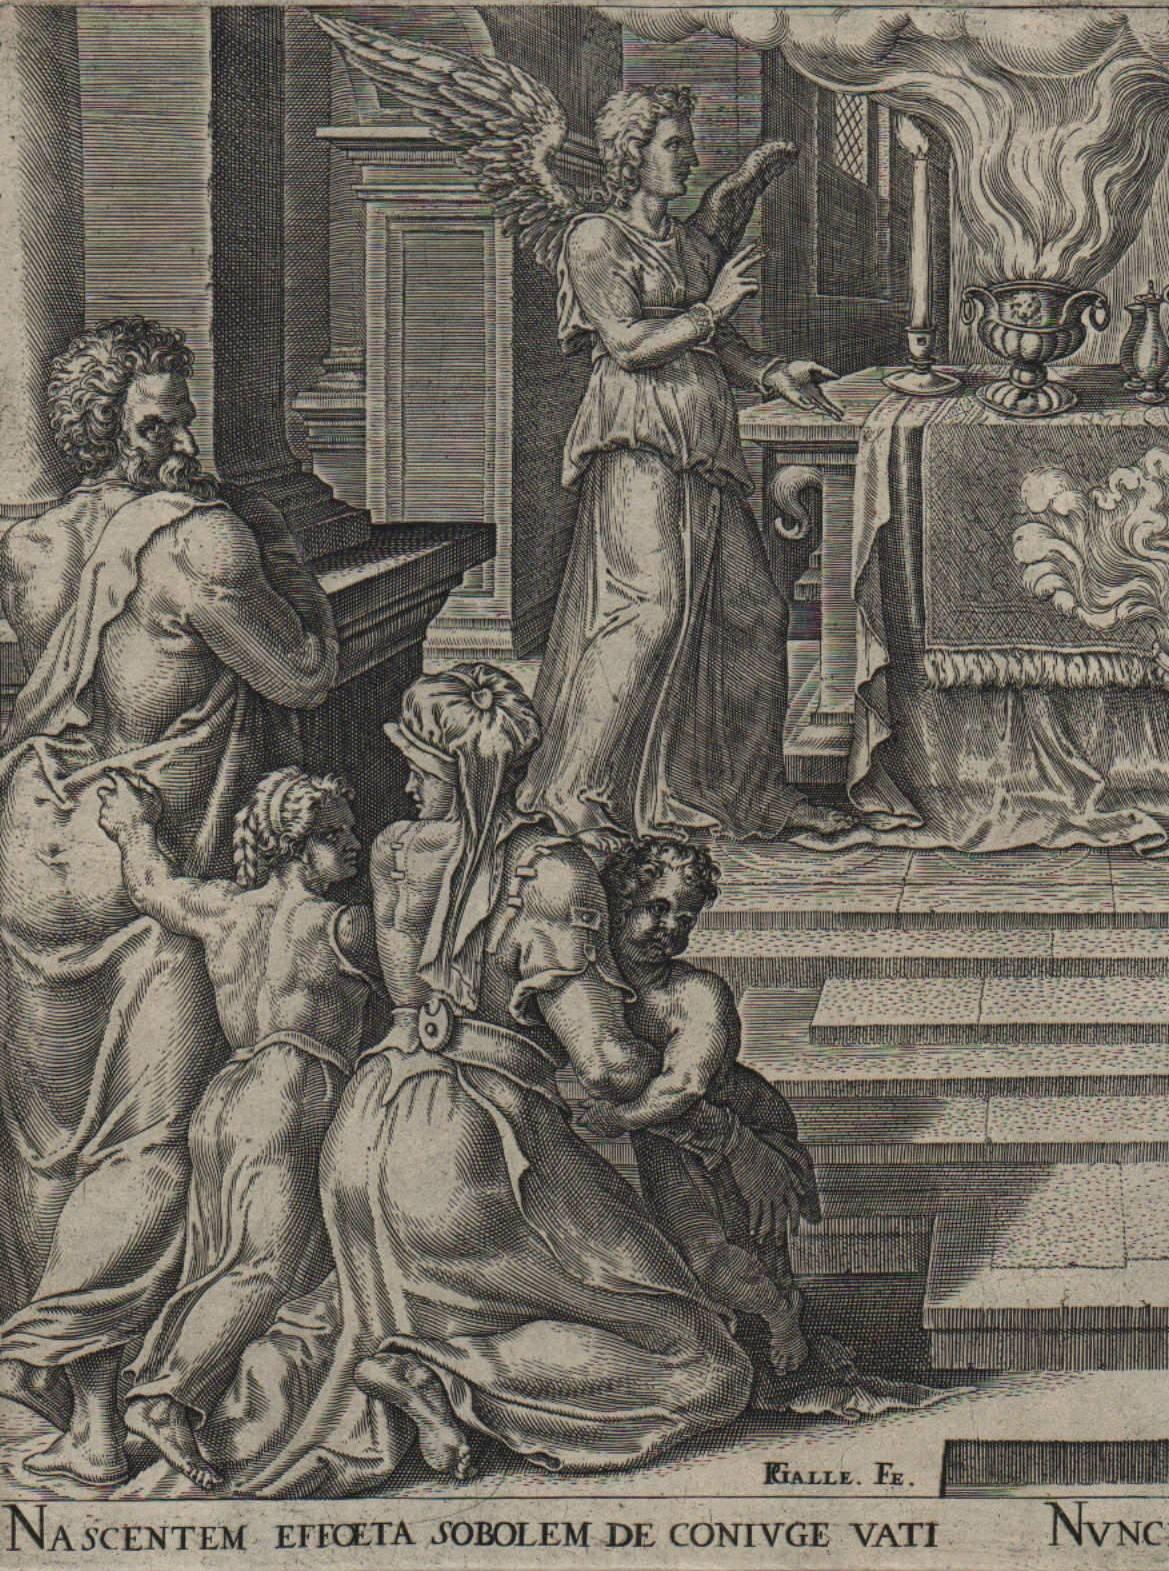 Zecharias Preaching in the Temple - 1564 Old Master Engraving Religious - Print by Philips Galle